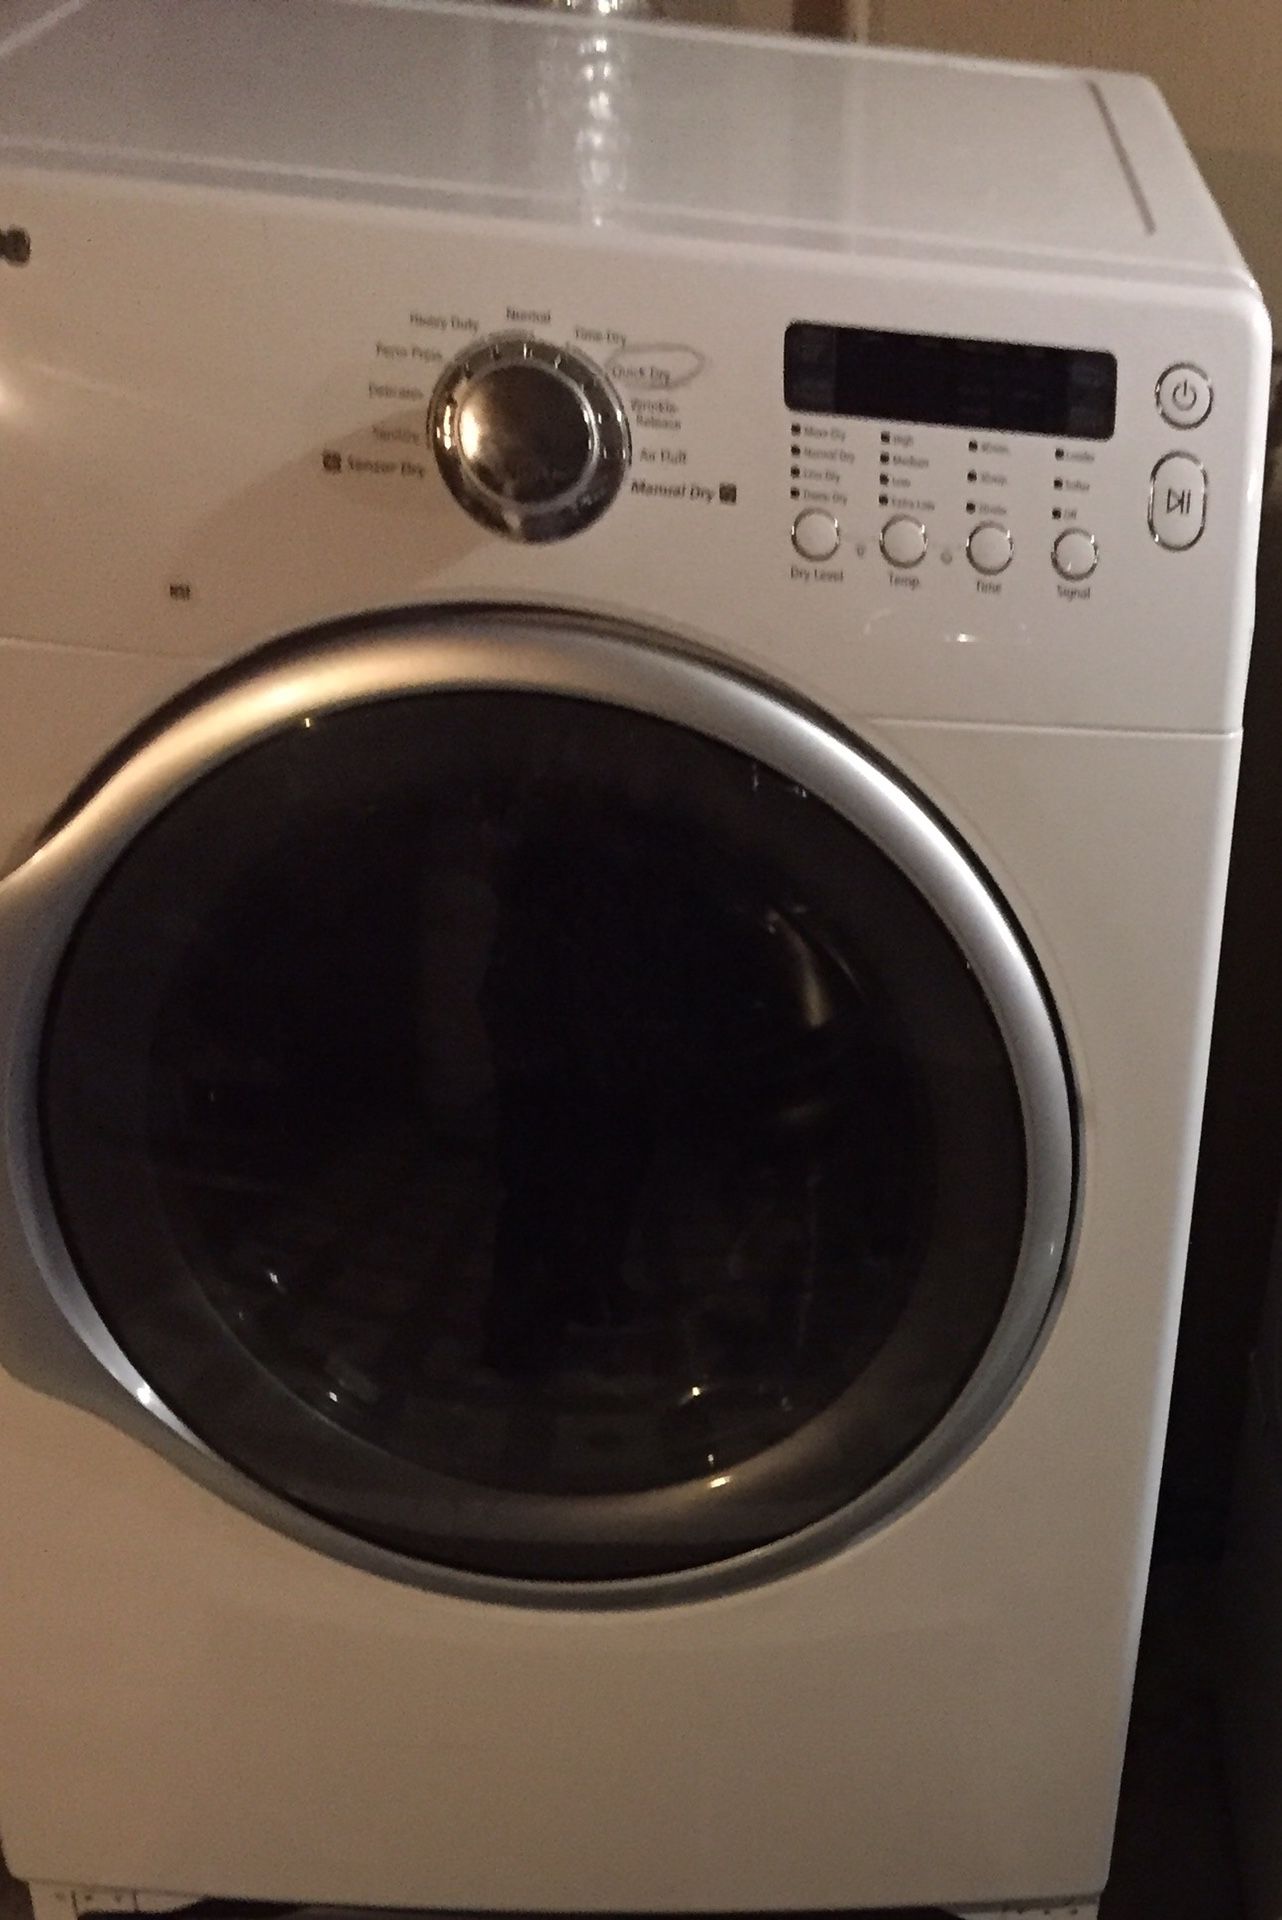 Samsung washer front loader white I have no idea what’s wrong with it is for sale